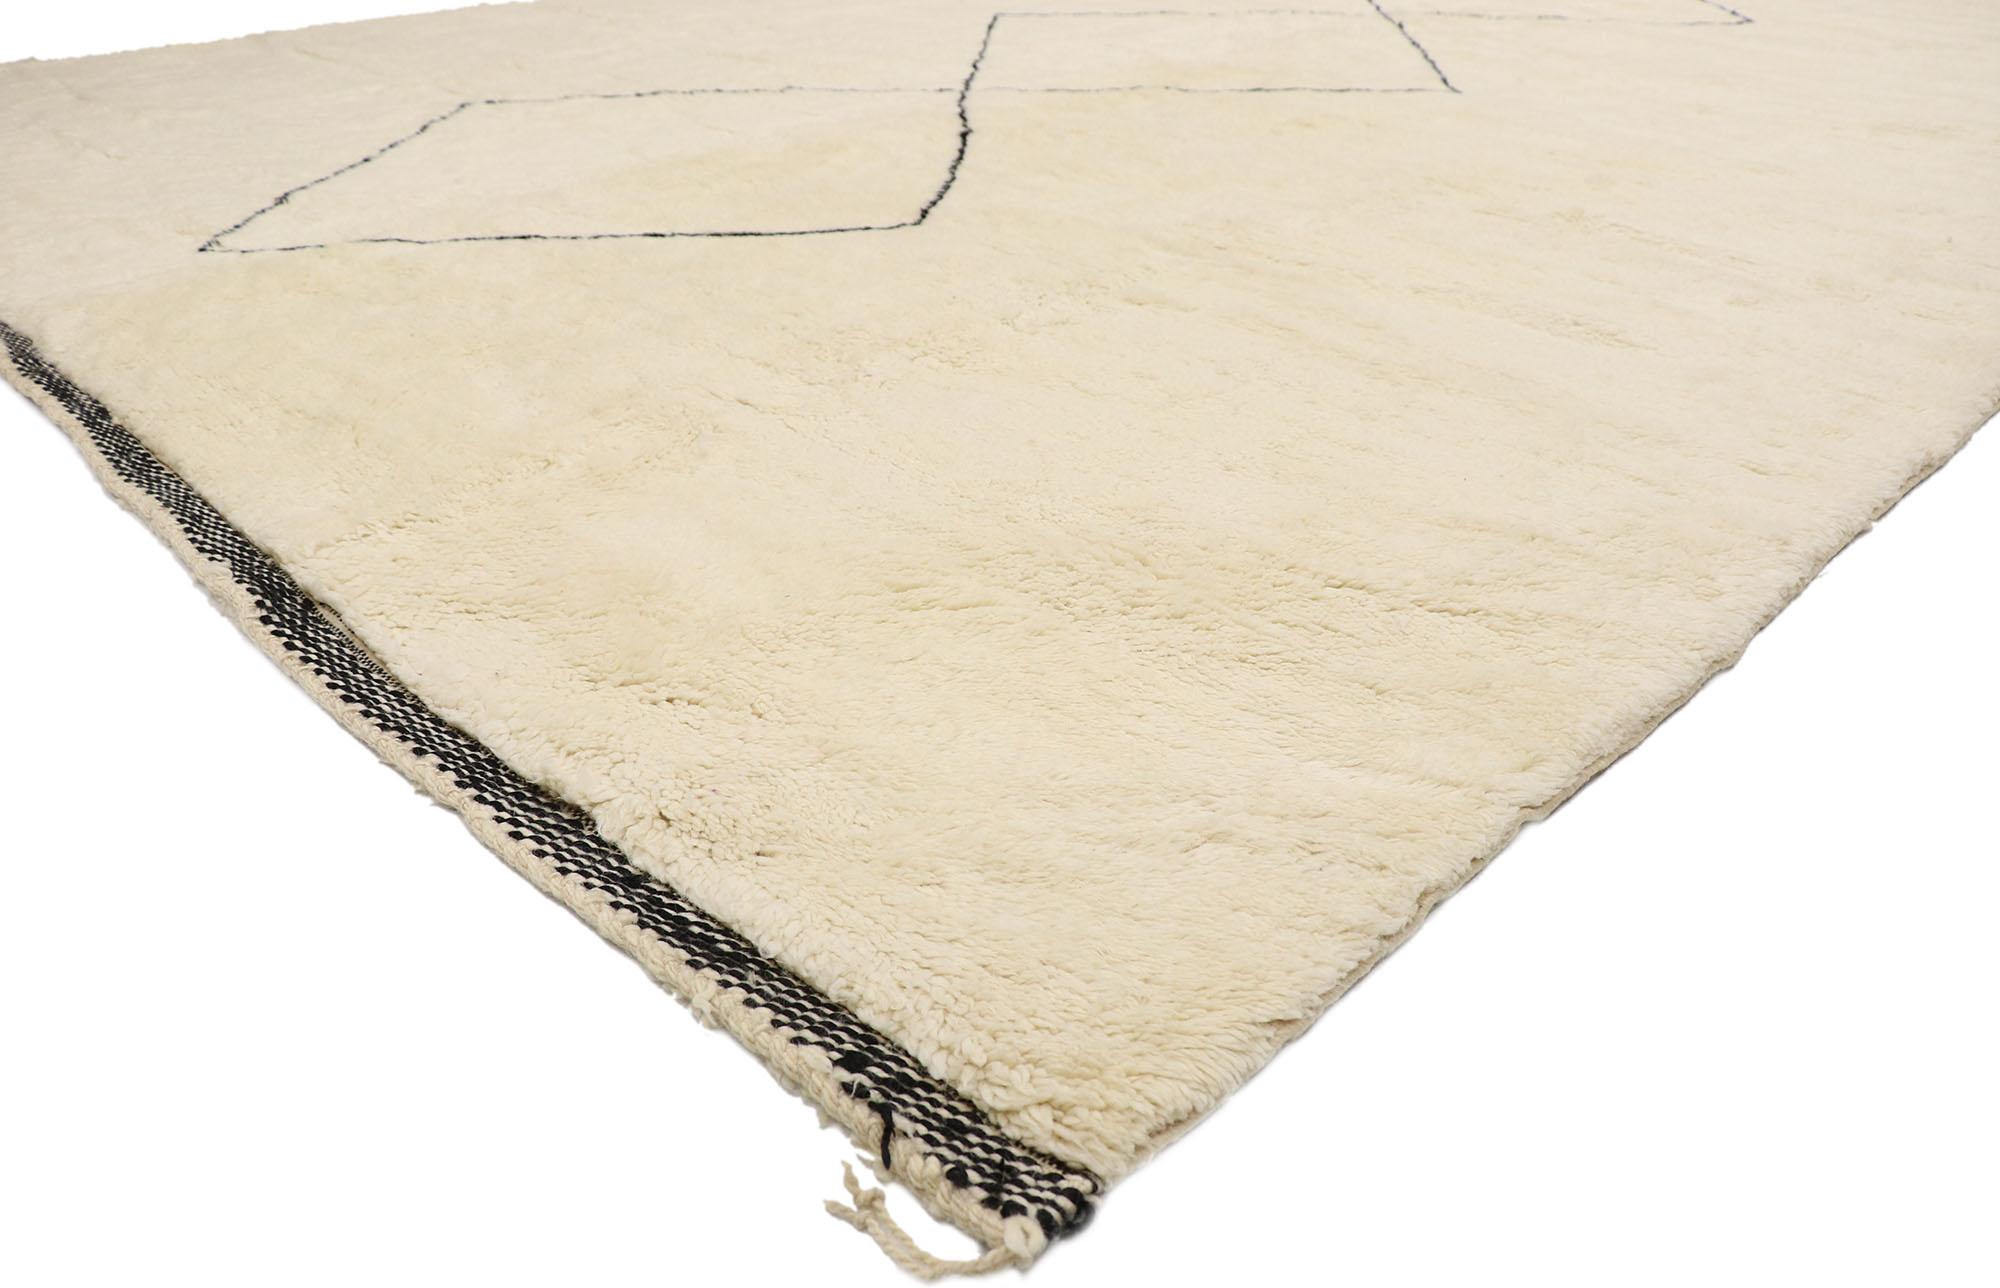 21137 Large Neutral Moroccan Rug, 11'03 x 15'08.
Cozy hyyge meets minimalist Shibui in this hand knotted wool Moroccan rug. The simple design and neutral colors woven into this piece work together to bring forth a feeling of cozy contentment without